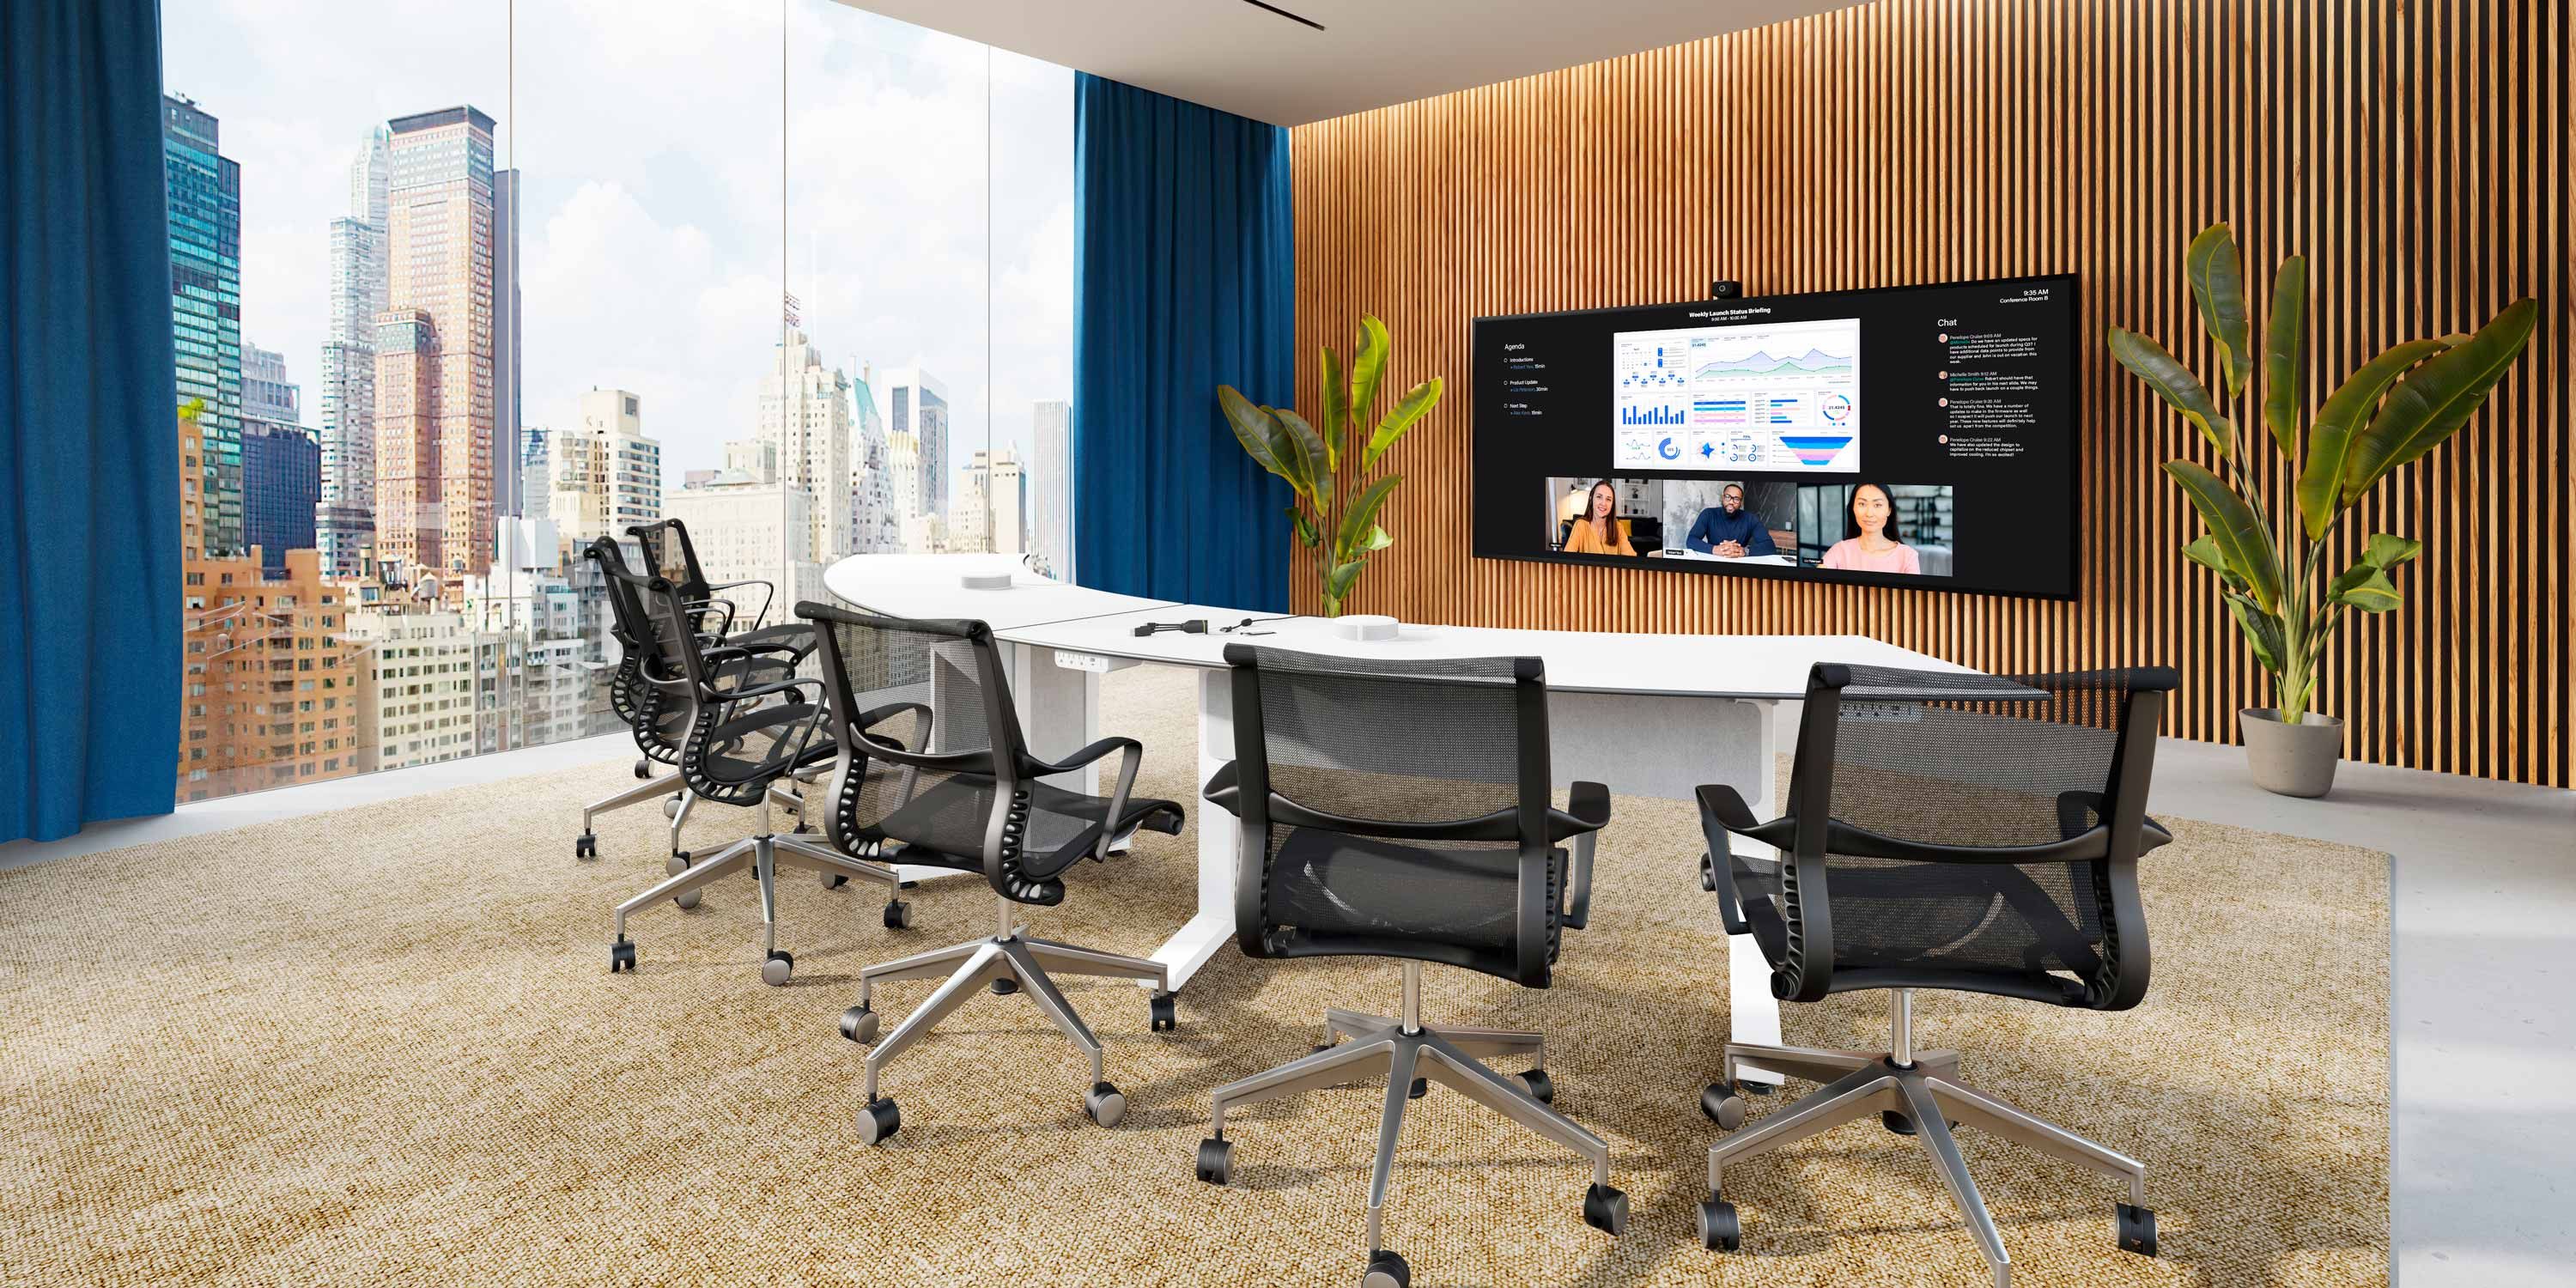 conference room with Chief technology